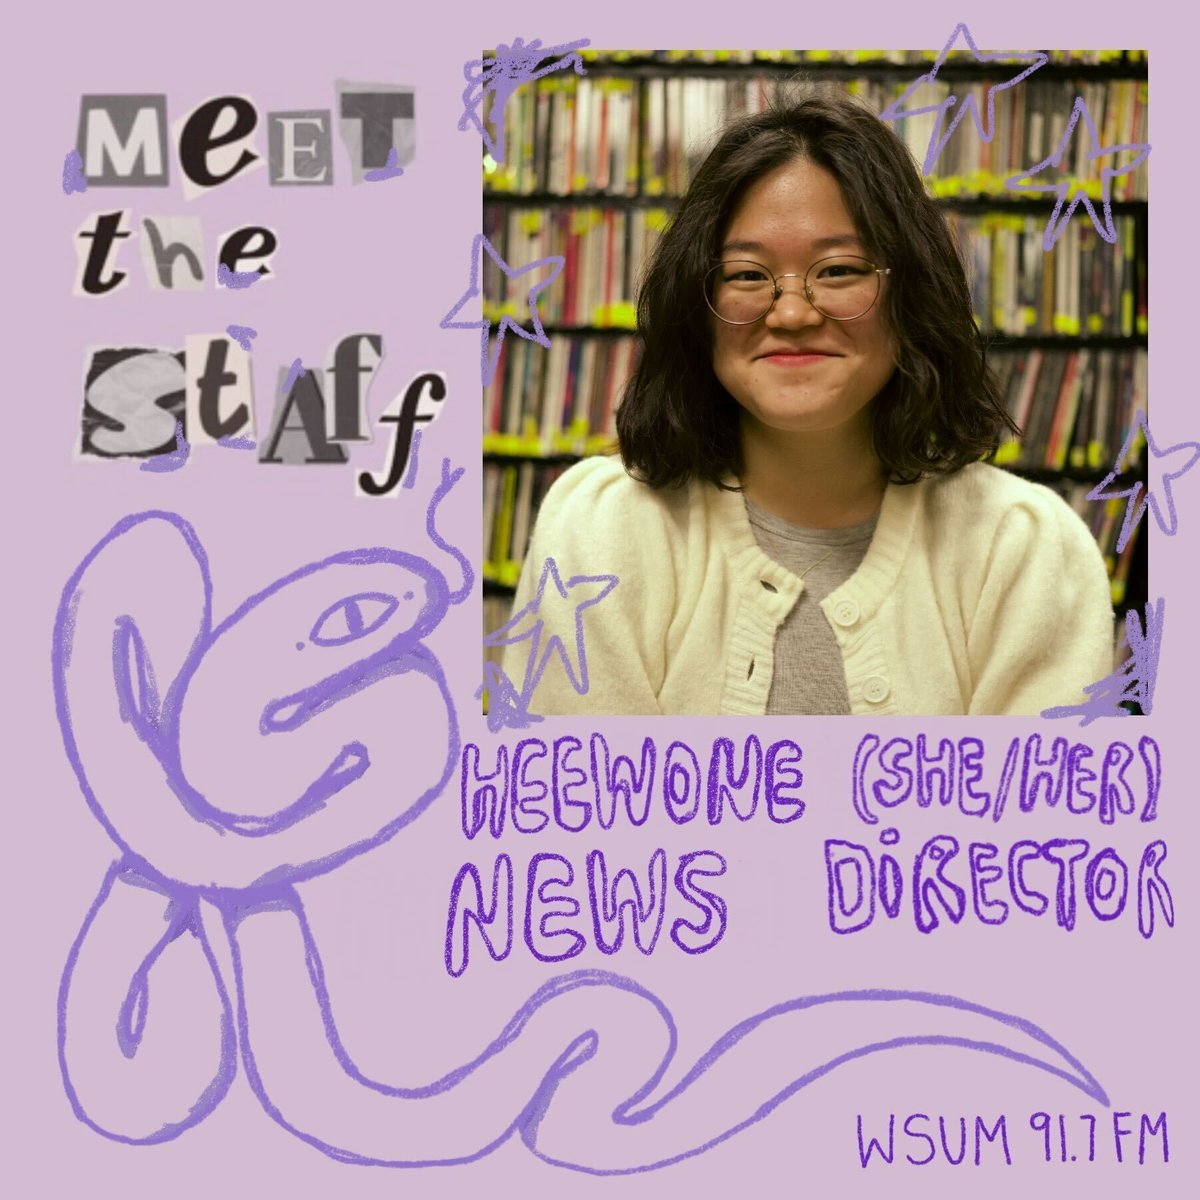 Meet The Staff!!! 📰 News Director 📰 Heewone Lim (she/her) Office Hours: Mon-Thu 4-6 and Sun 1-5 Tune into their show 'In Konglish', 9 PM on FreeFlow. 'It's a bilingual Korean-English show where we read Korean literature and citchat!'